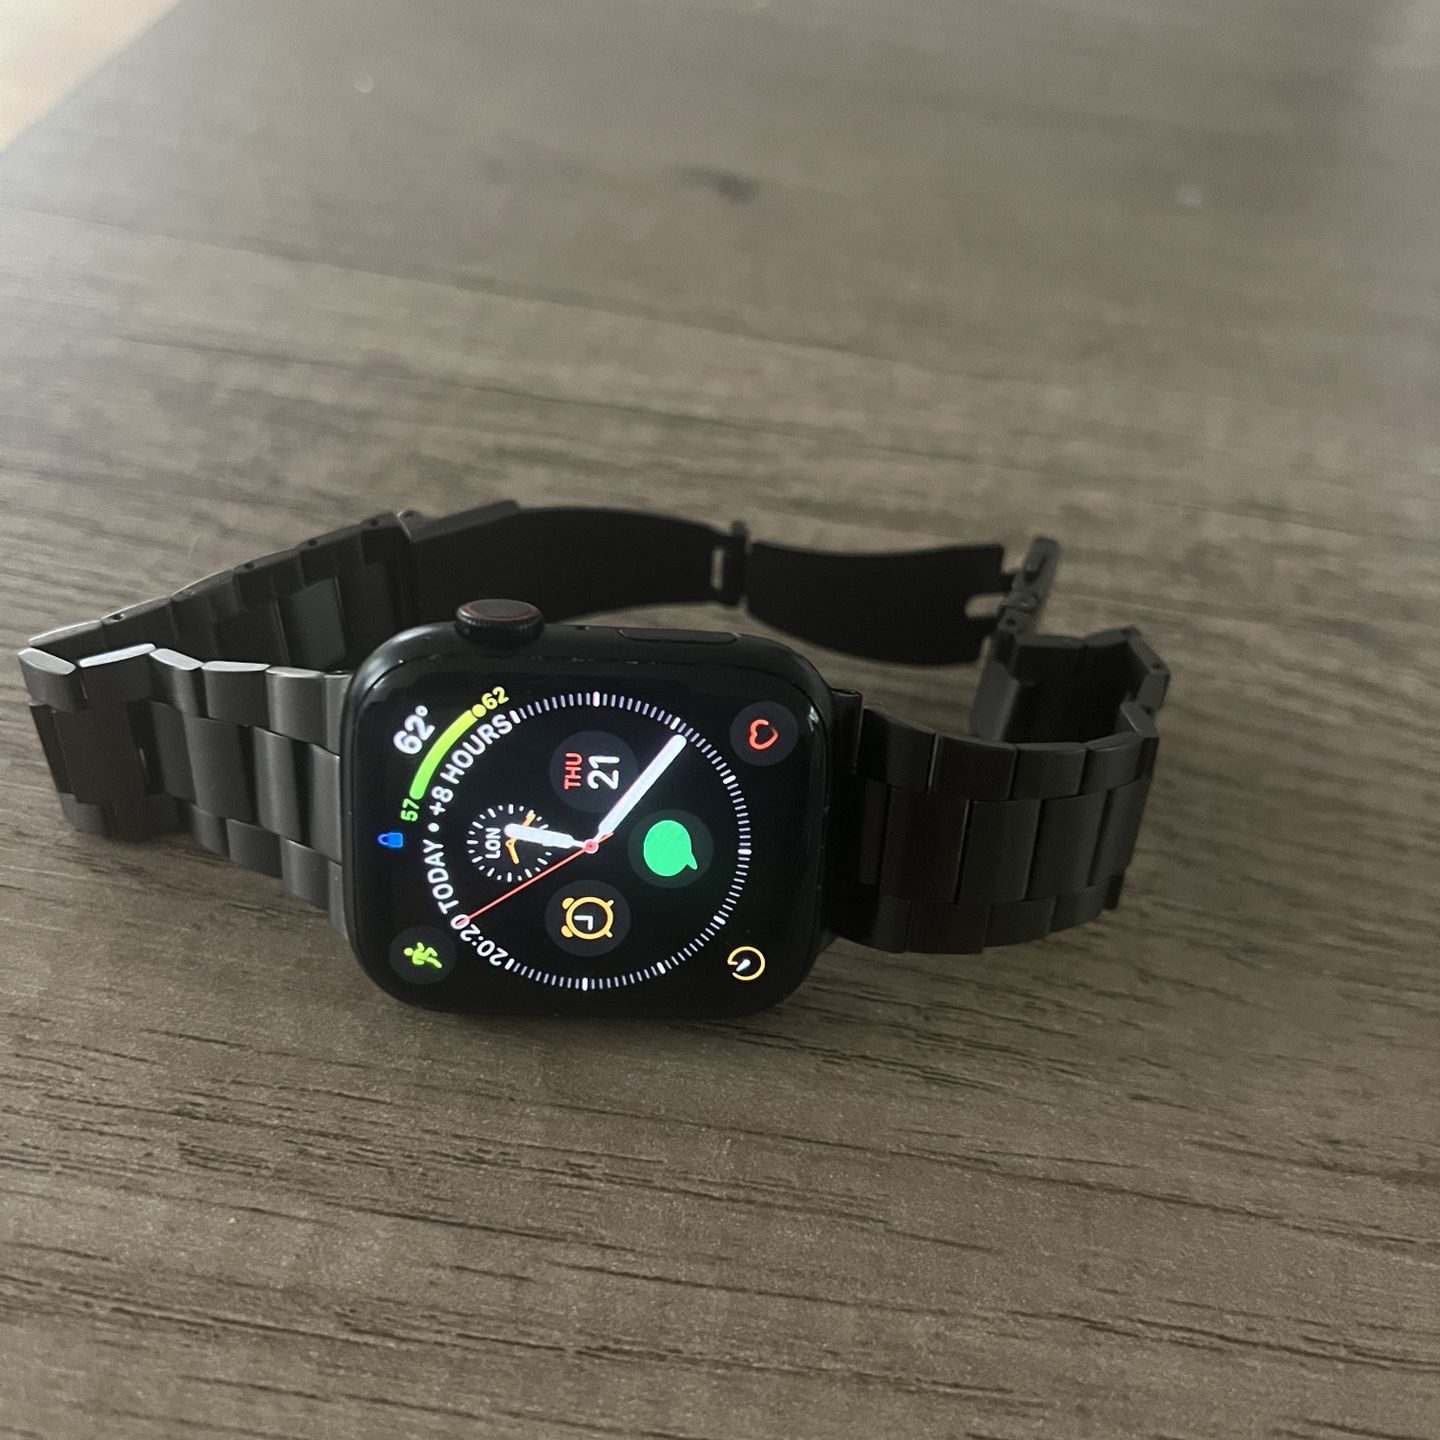 Apple Watch Series 7 With gps